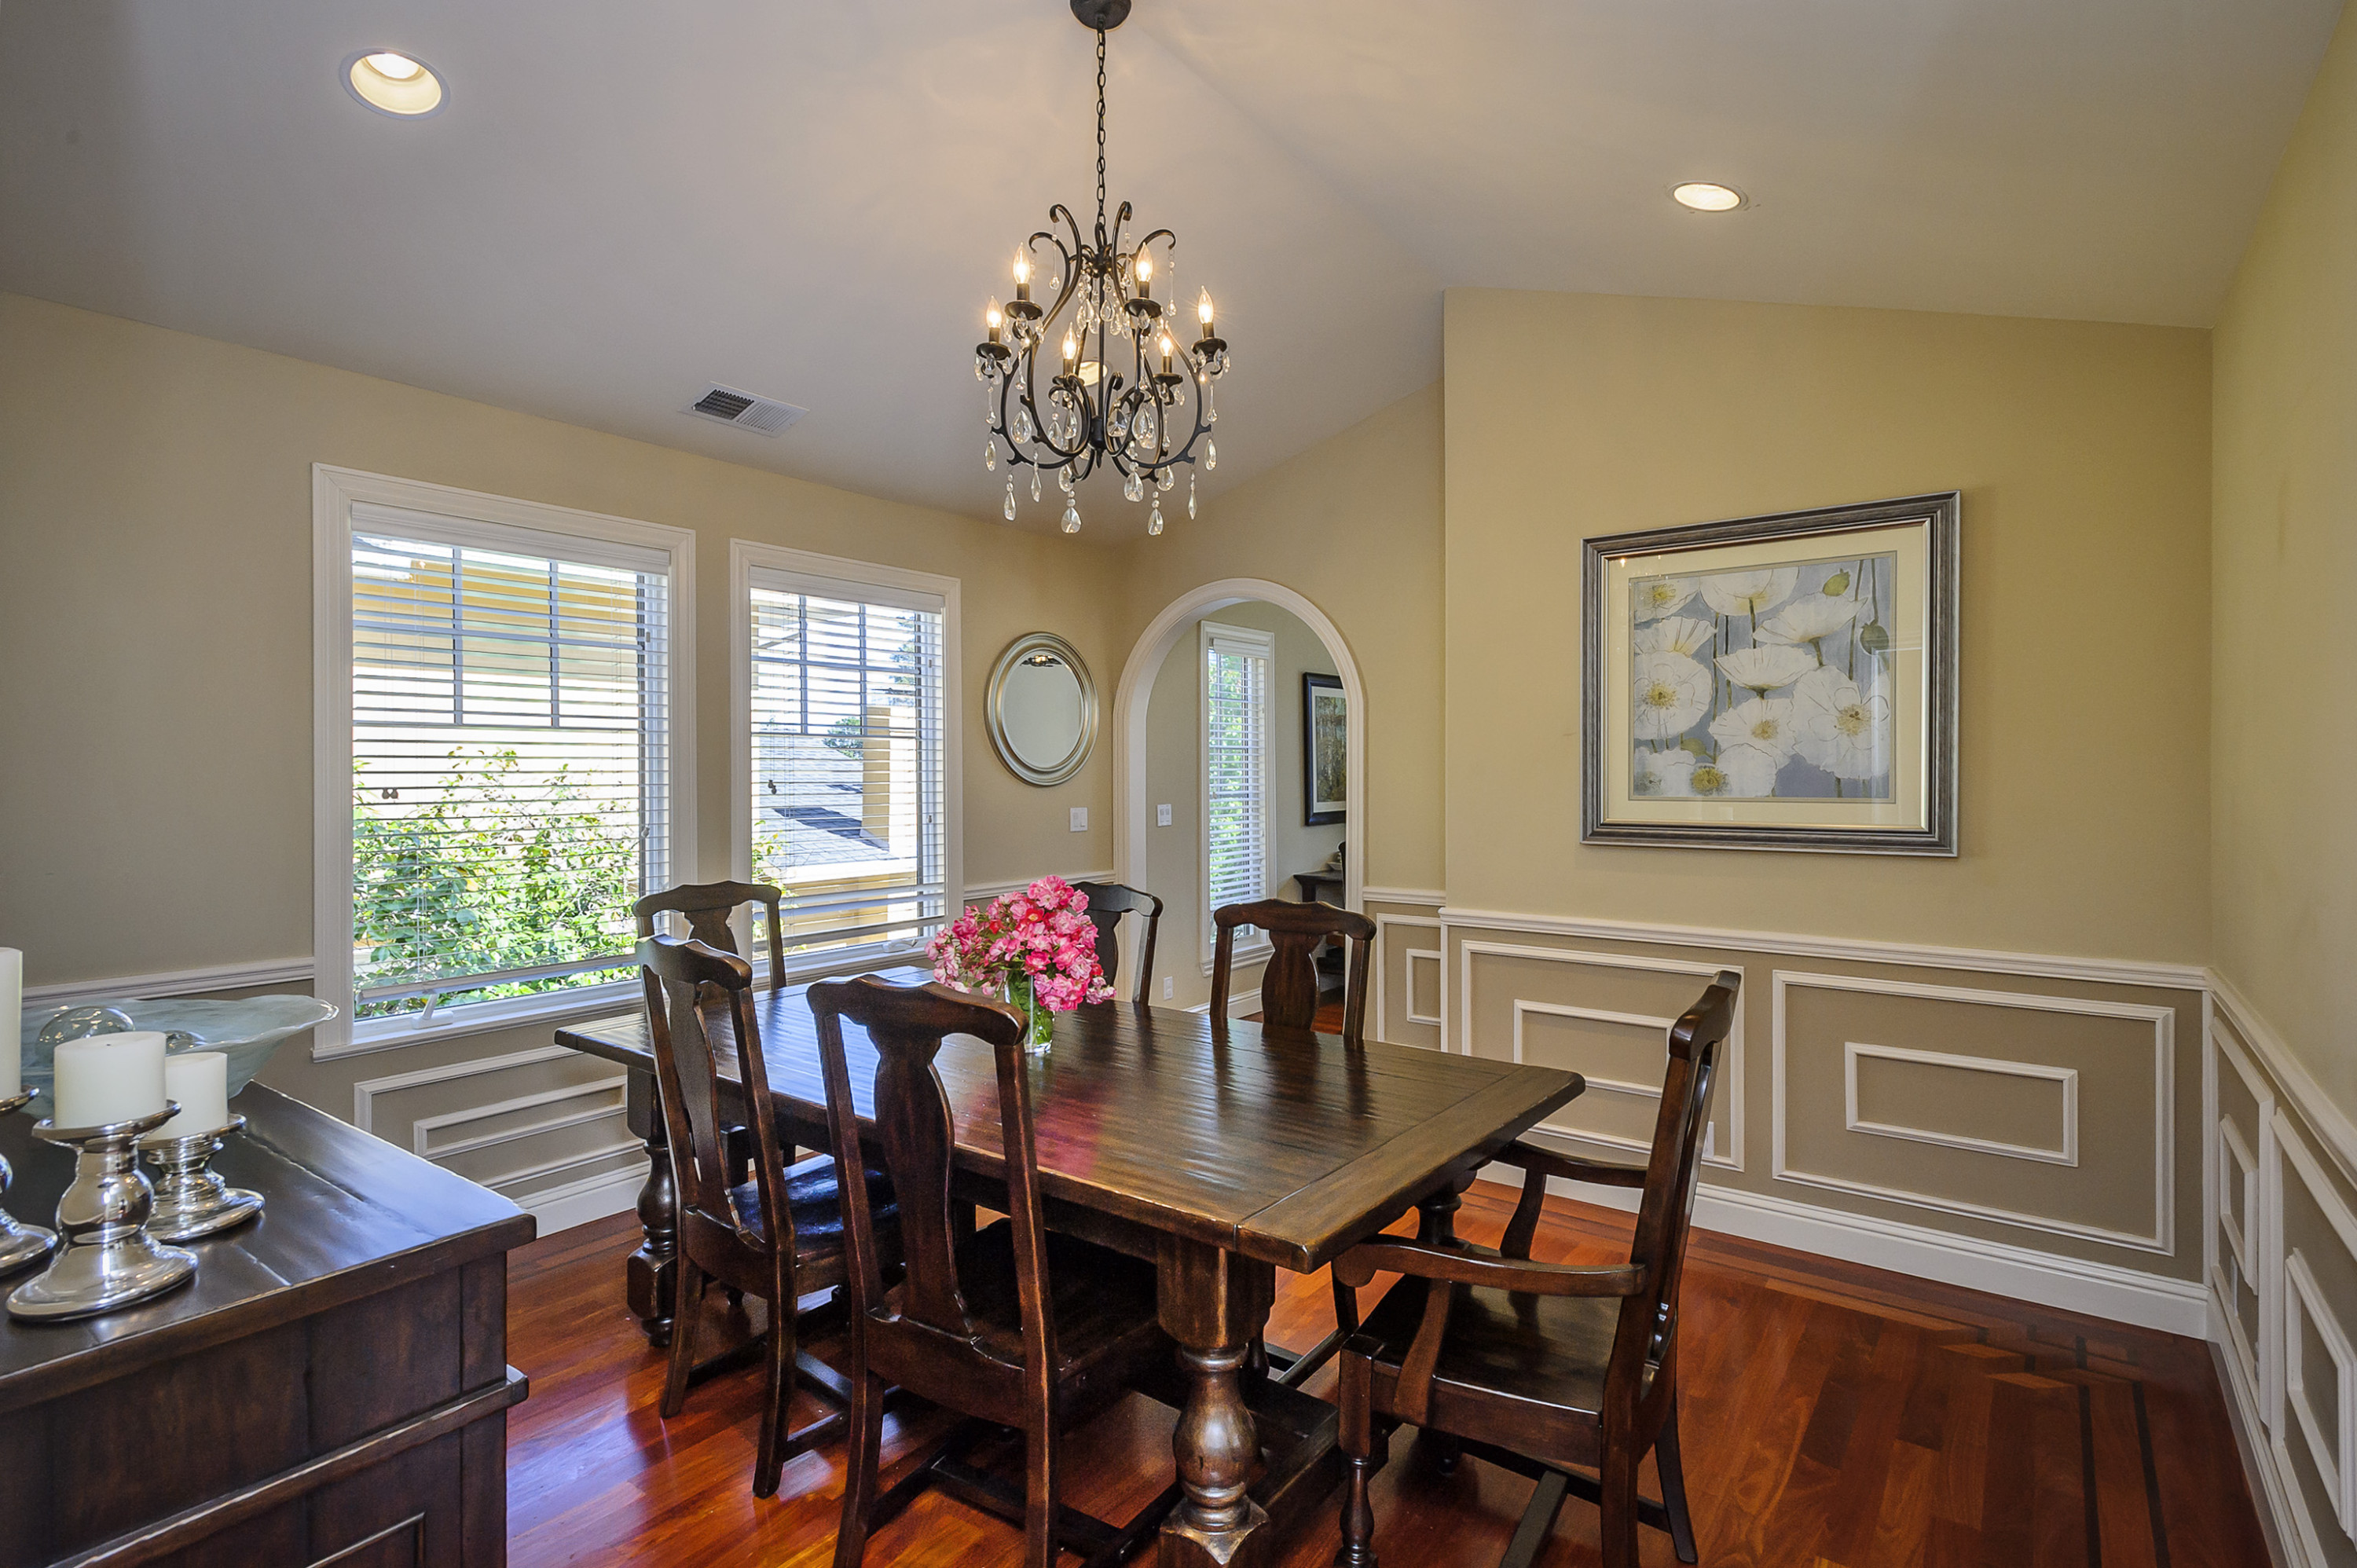 1465 Drake Avenue Dining Area Arch Way in Easton Addition Neighborhood in Burlingame.